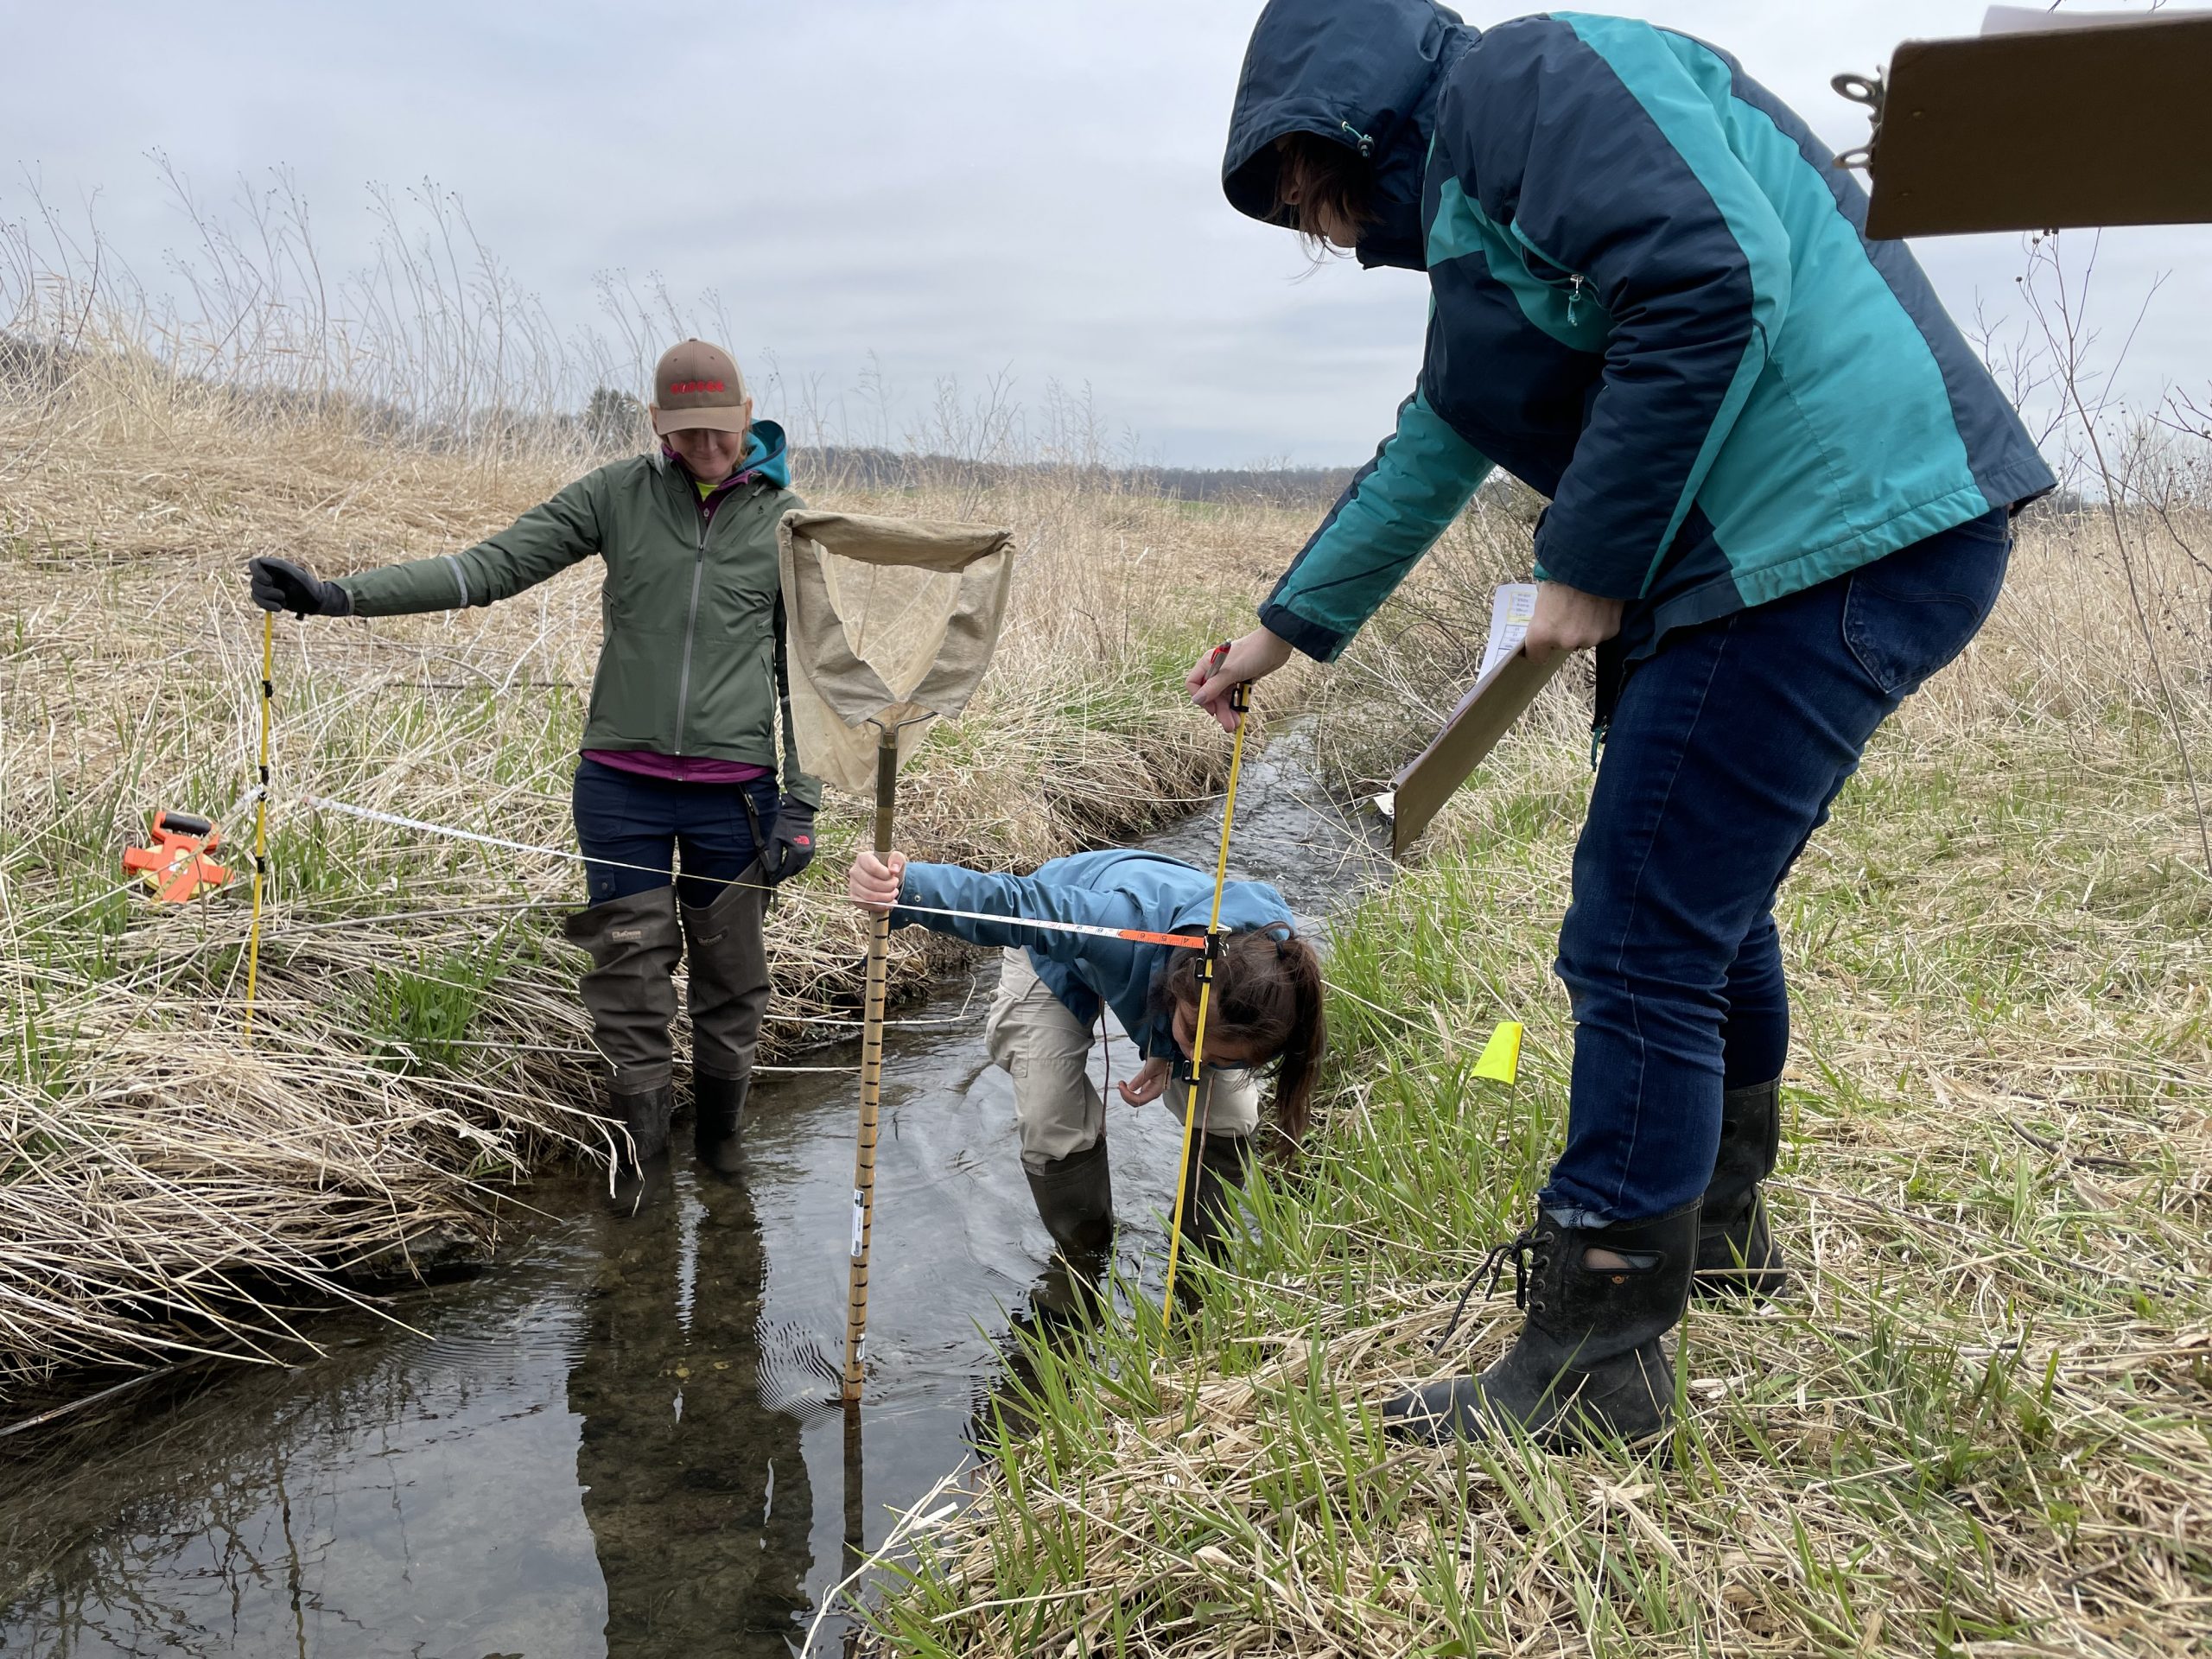 Volunteers measure s the depth of a small stream